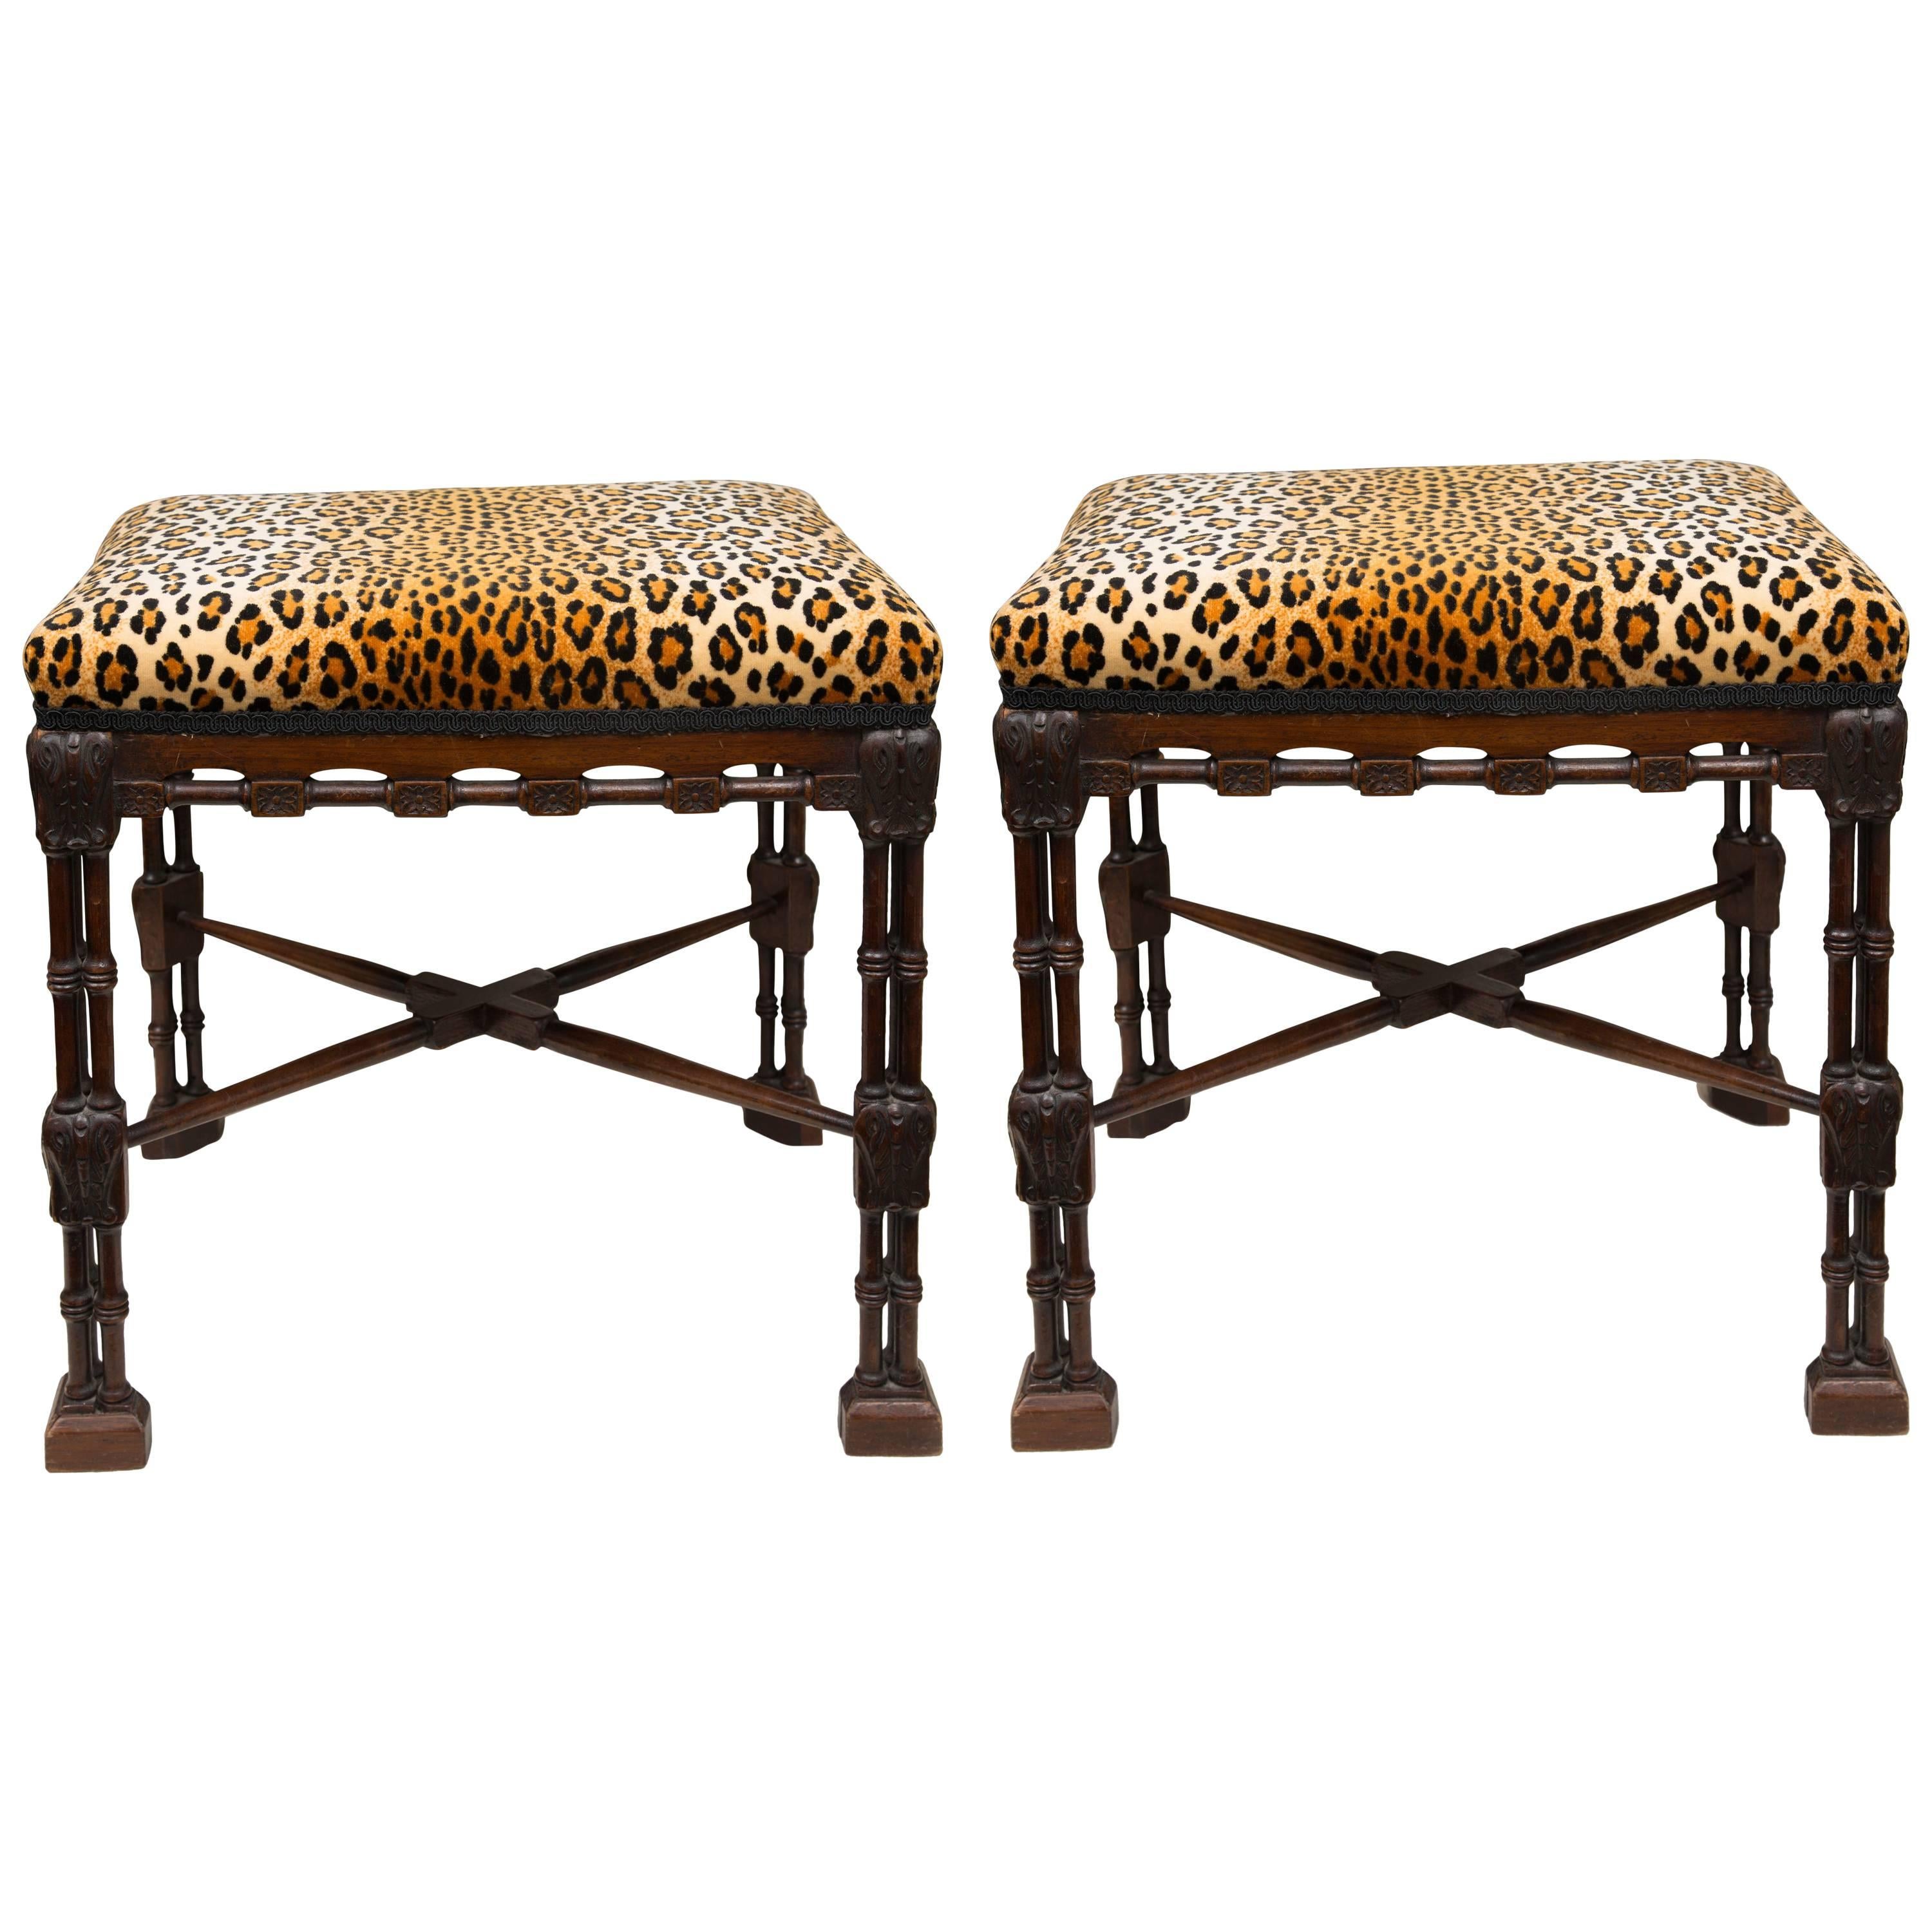 Near-Pair of Regency Style Mahogany Faux Bamboo Upholstered Benches